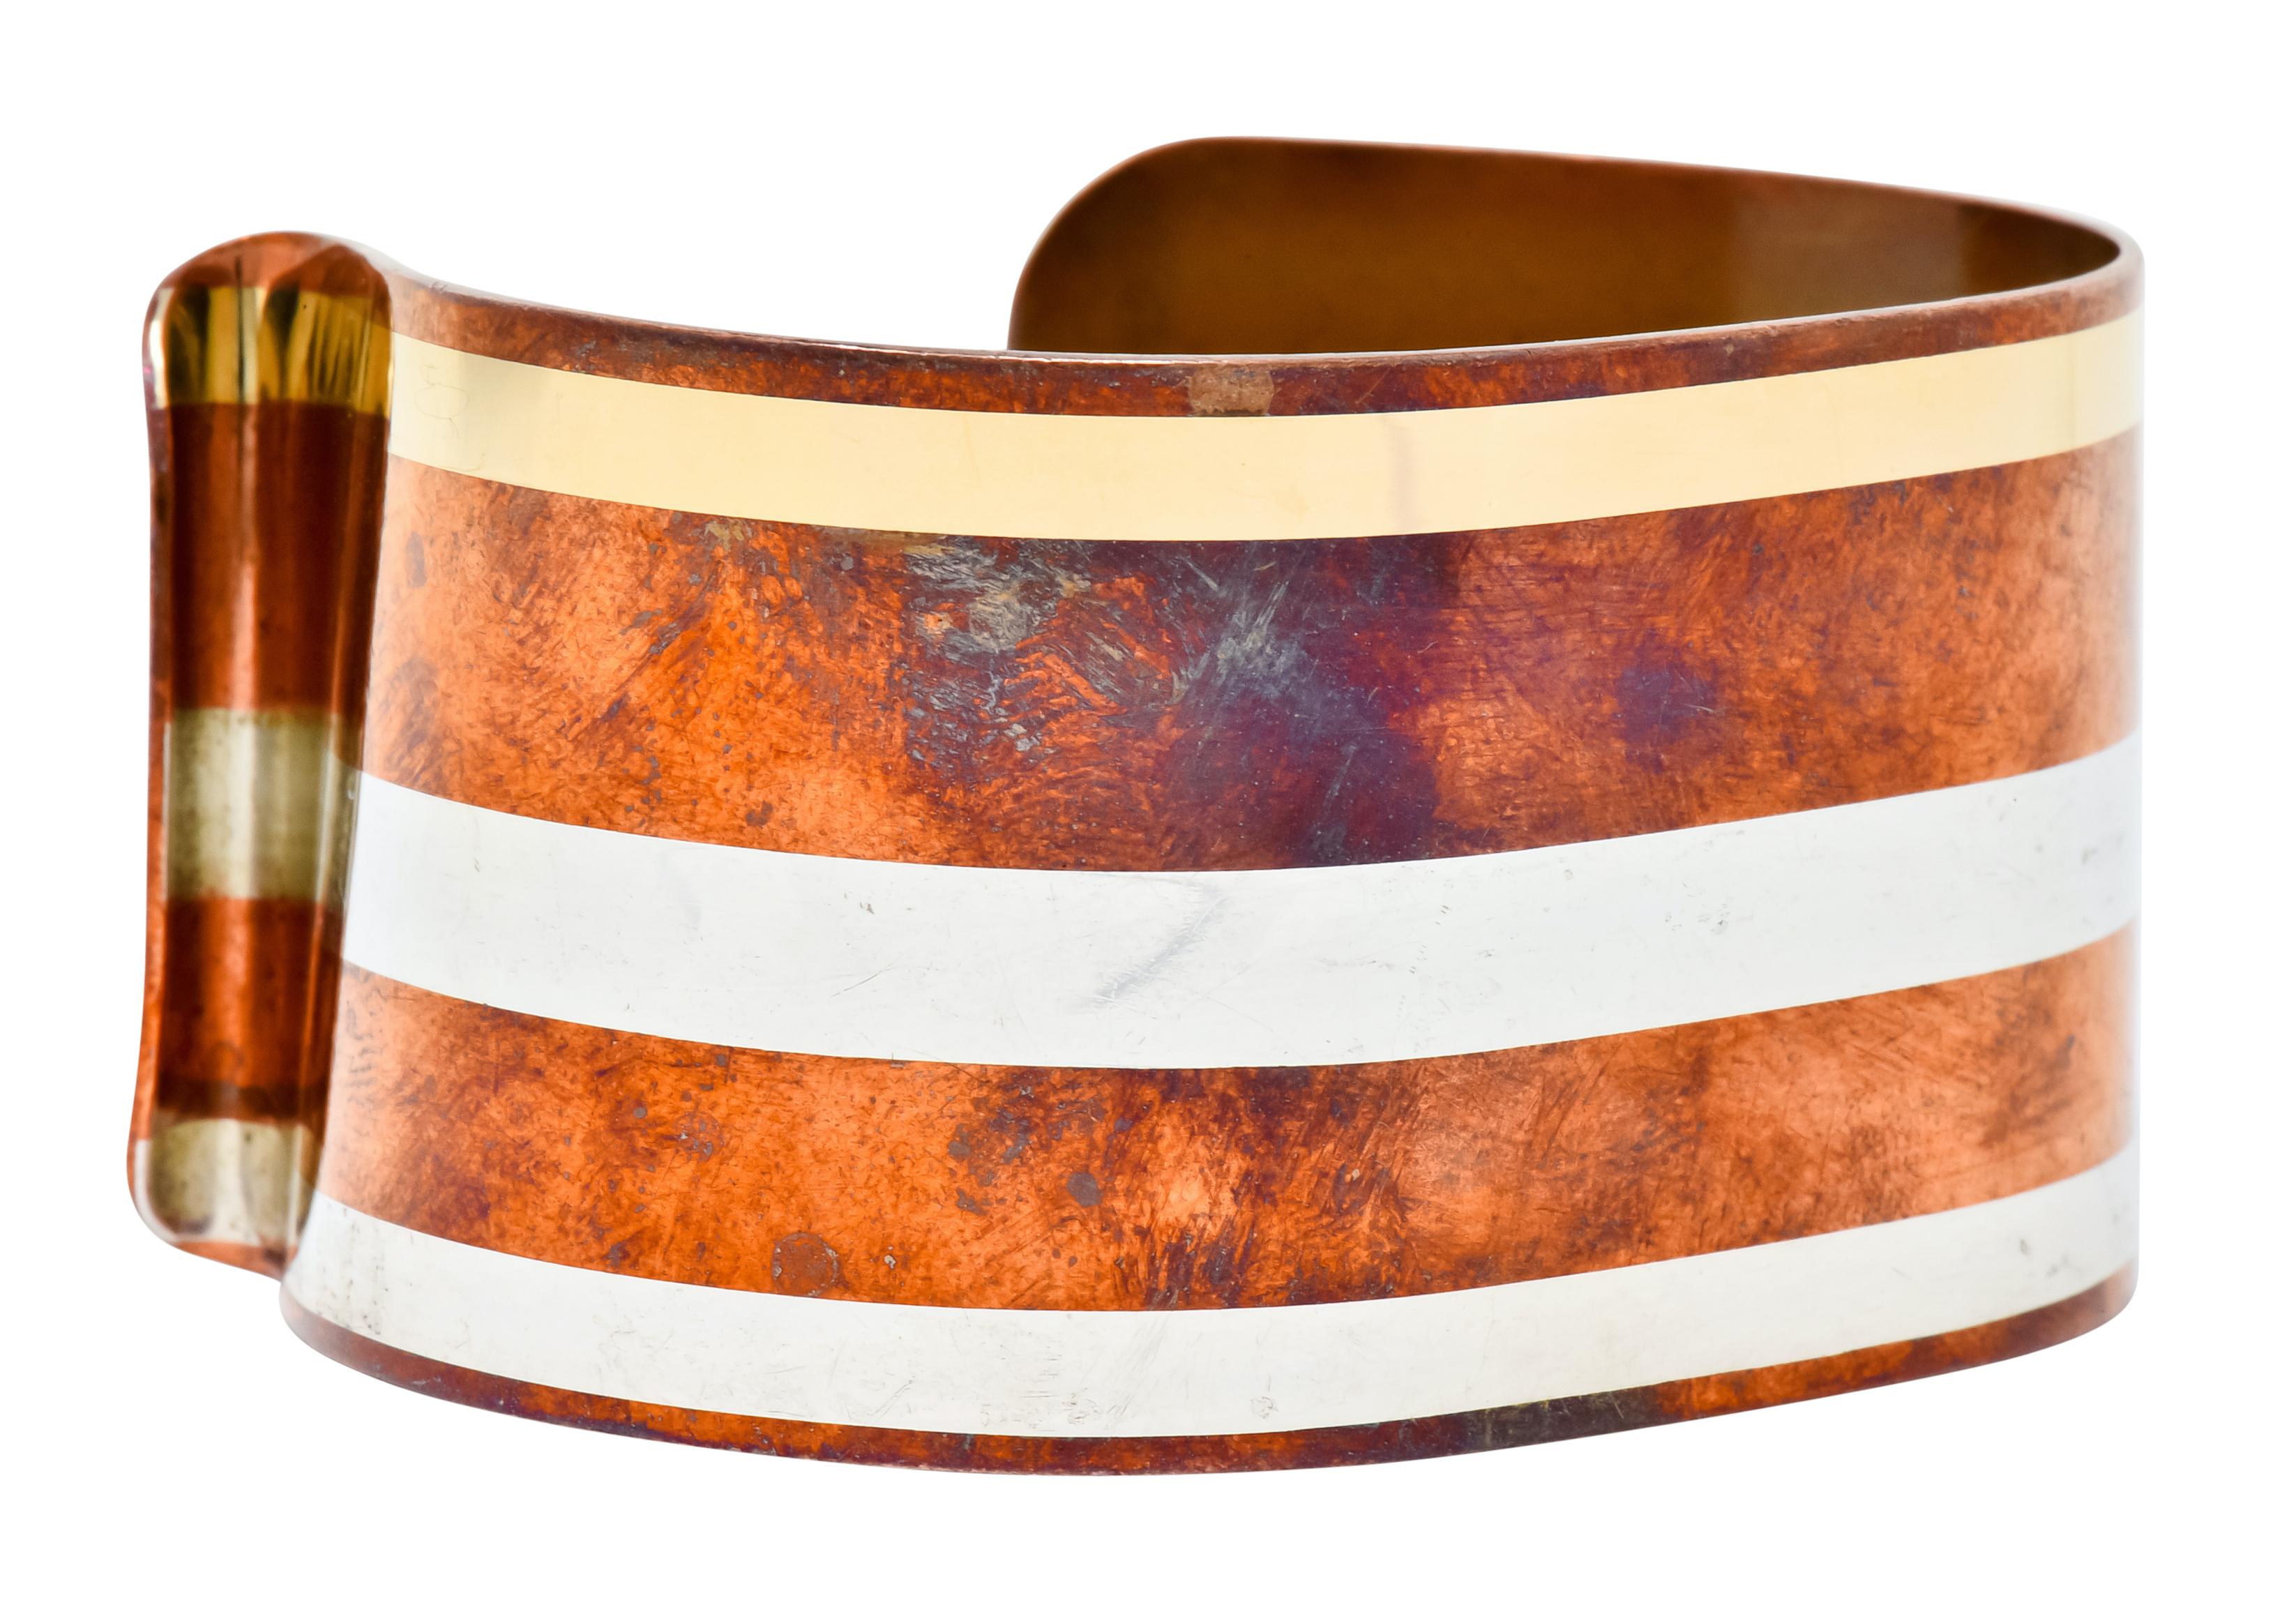 Open cuff style bracelet comprised of copper, brass, and silver featuring a beautifully aged finish

Inlaid with three polished sections

Terminating in unique curvature for a comfortable fit

Fully signed Tiffany & Co. 78 and is attributed to